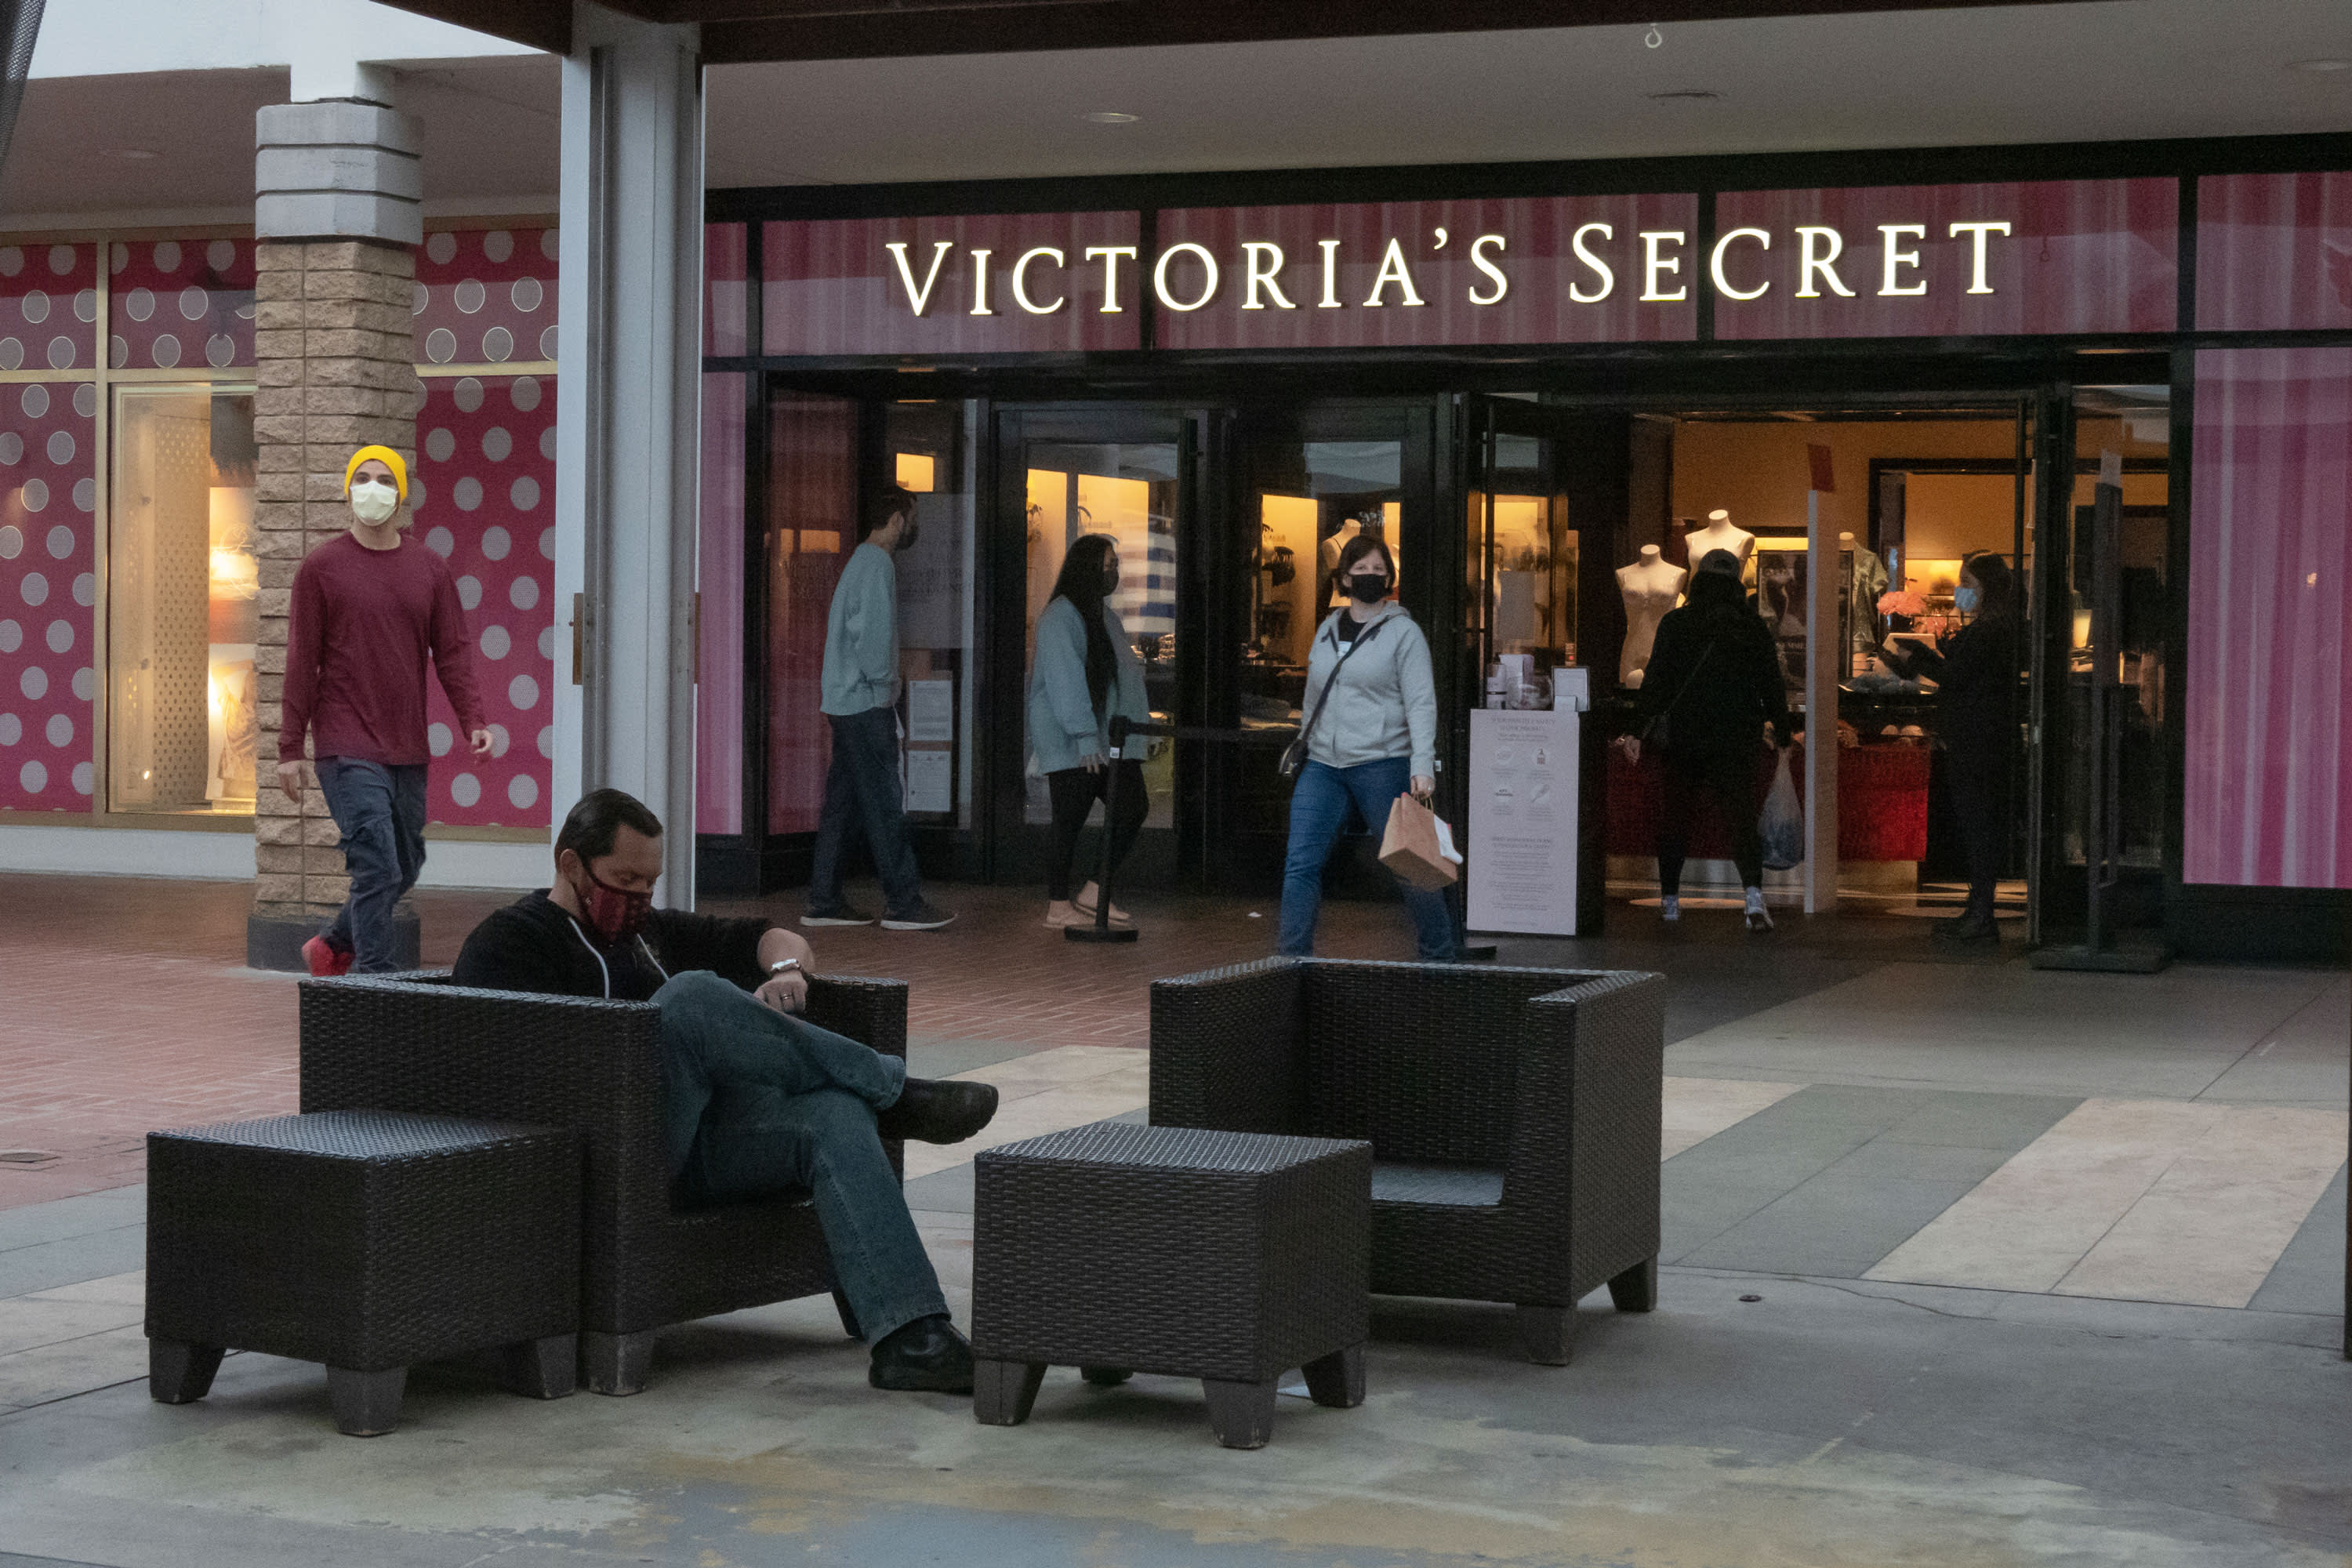 Victoria's Secret shares rise after retailer touts strong holiday season, unveils stock buyback plan - CNBC